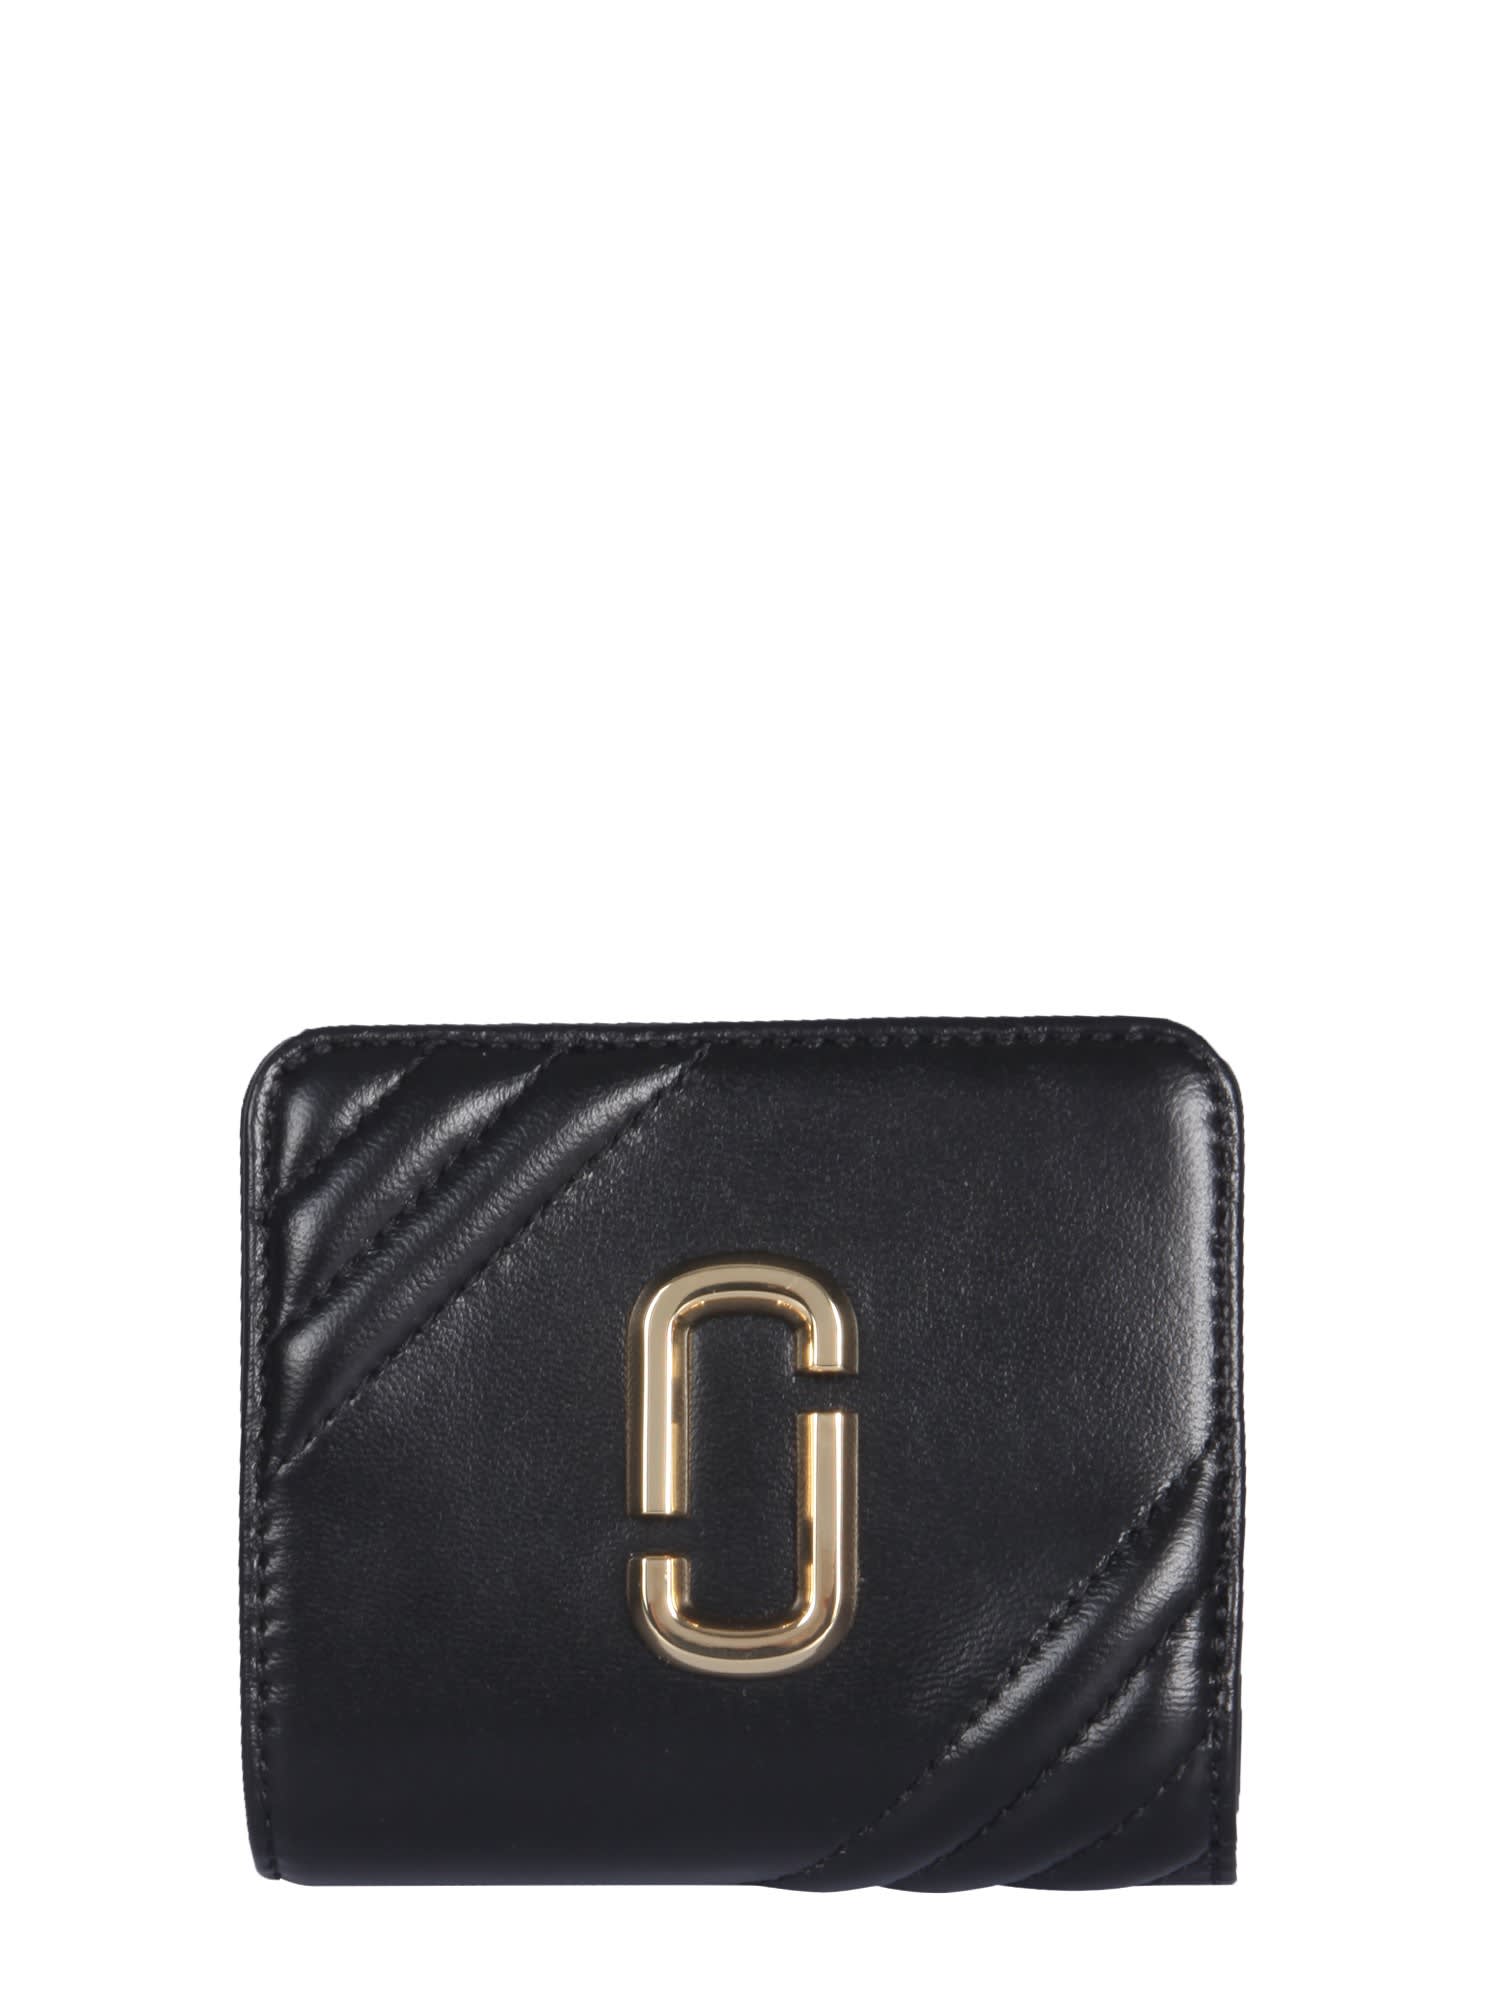 Marc Jacobs Mini Glam Shot Compact Wallet